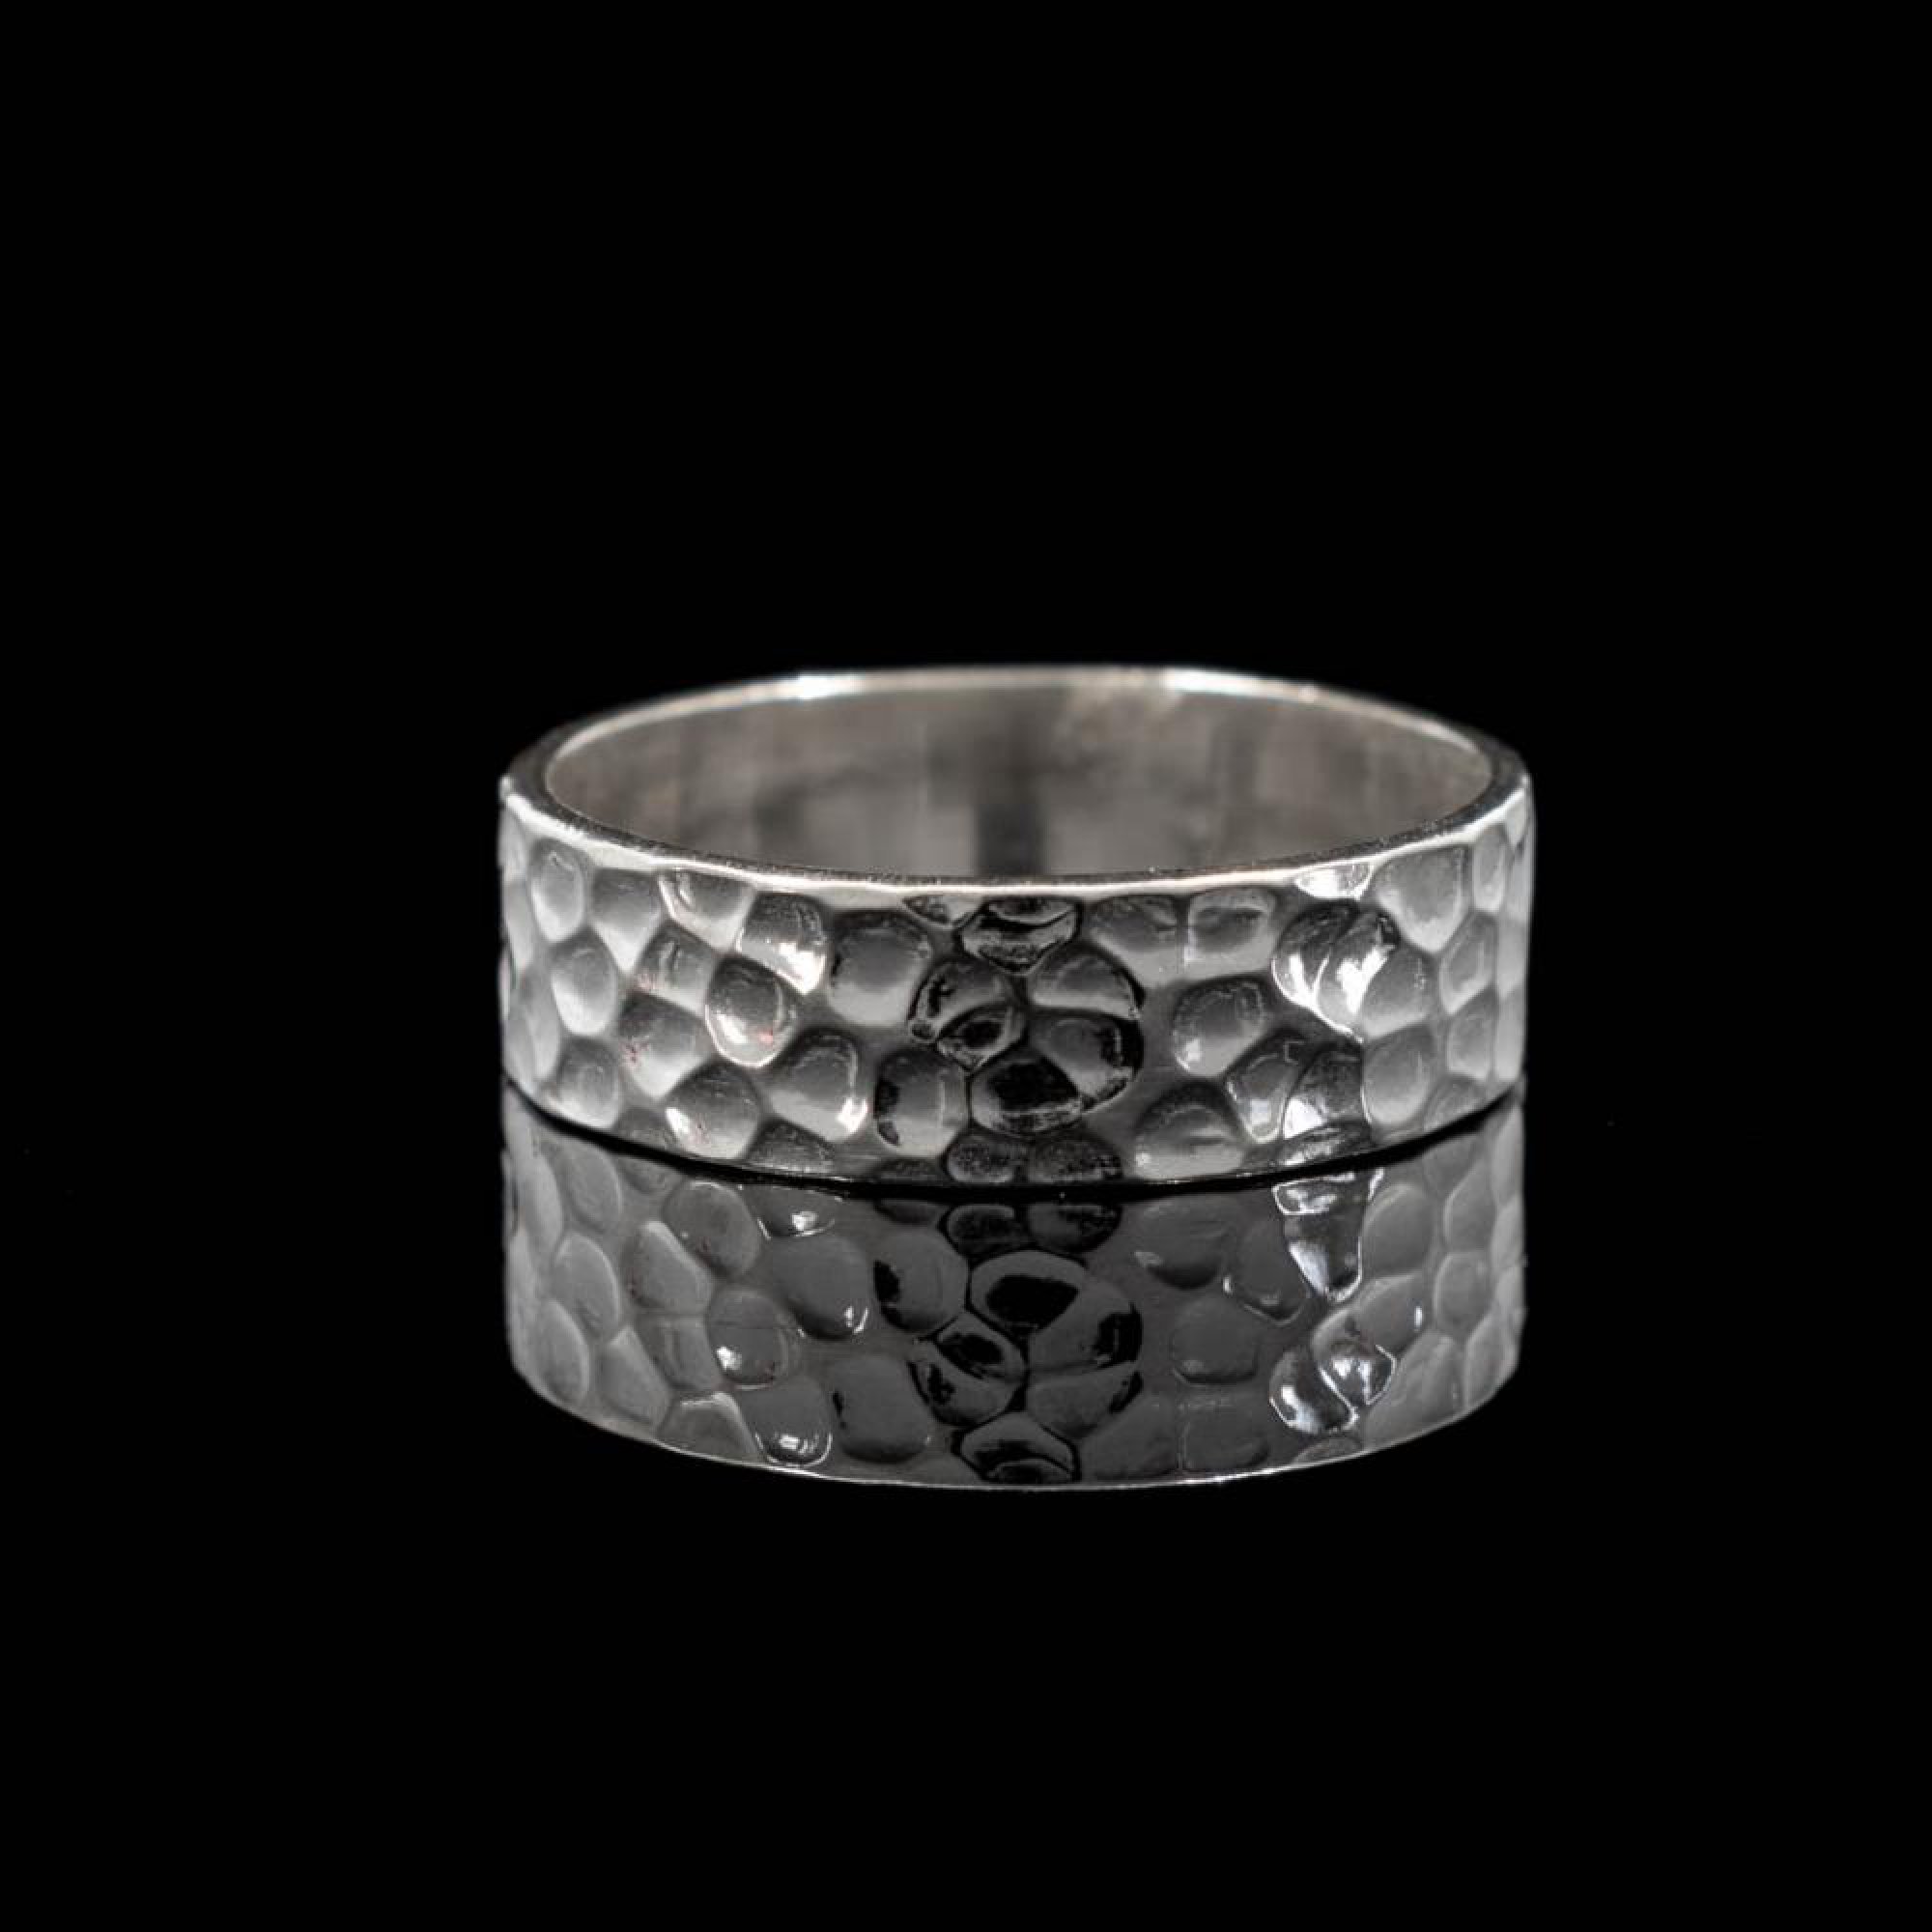 Silver band ring 5.5mm